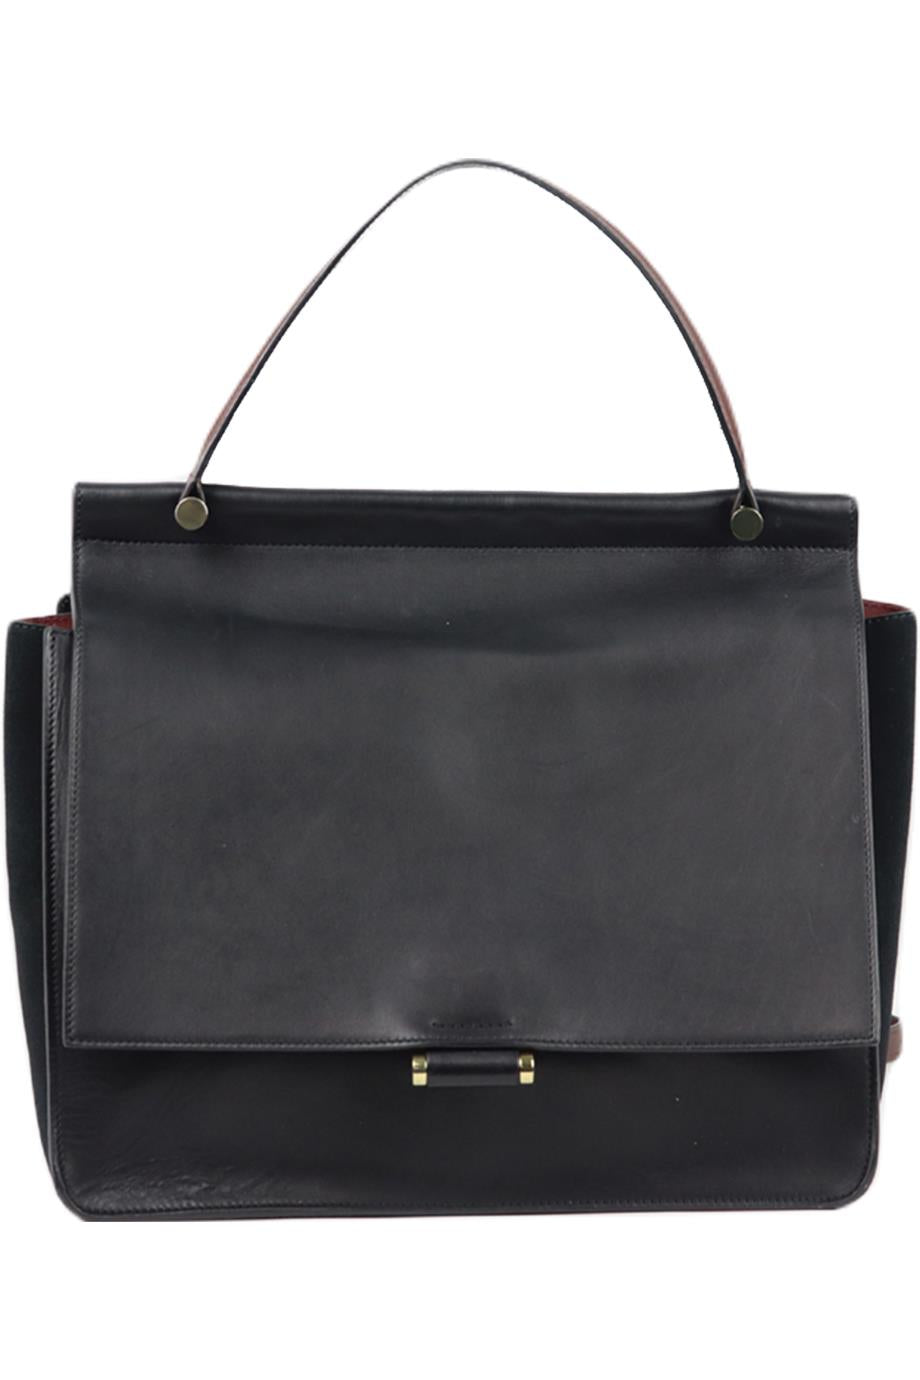 BY MALENE BIRGER SUEDE AND LEATHER SHOULDER BAG